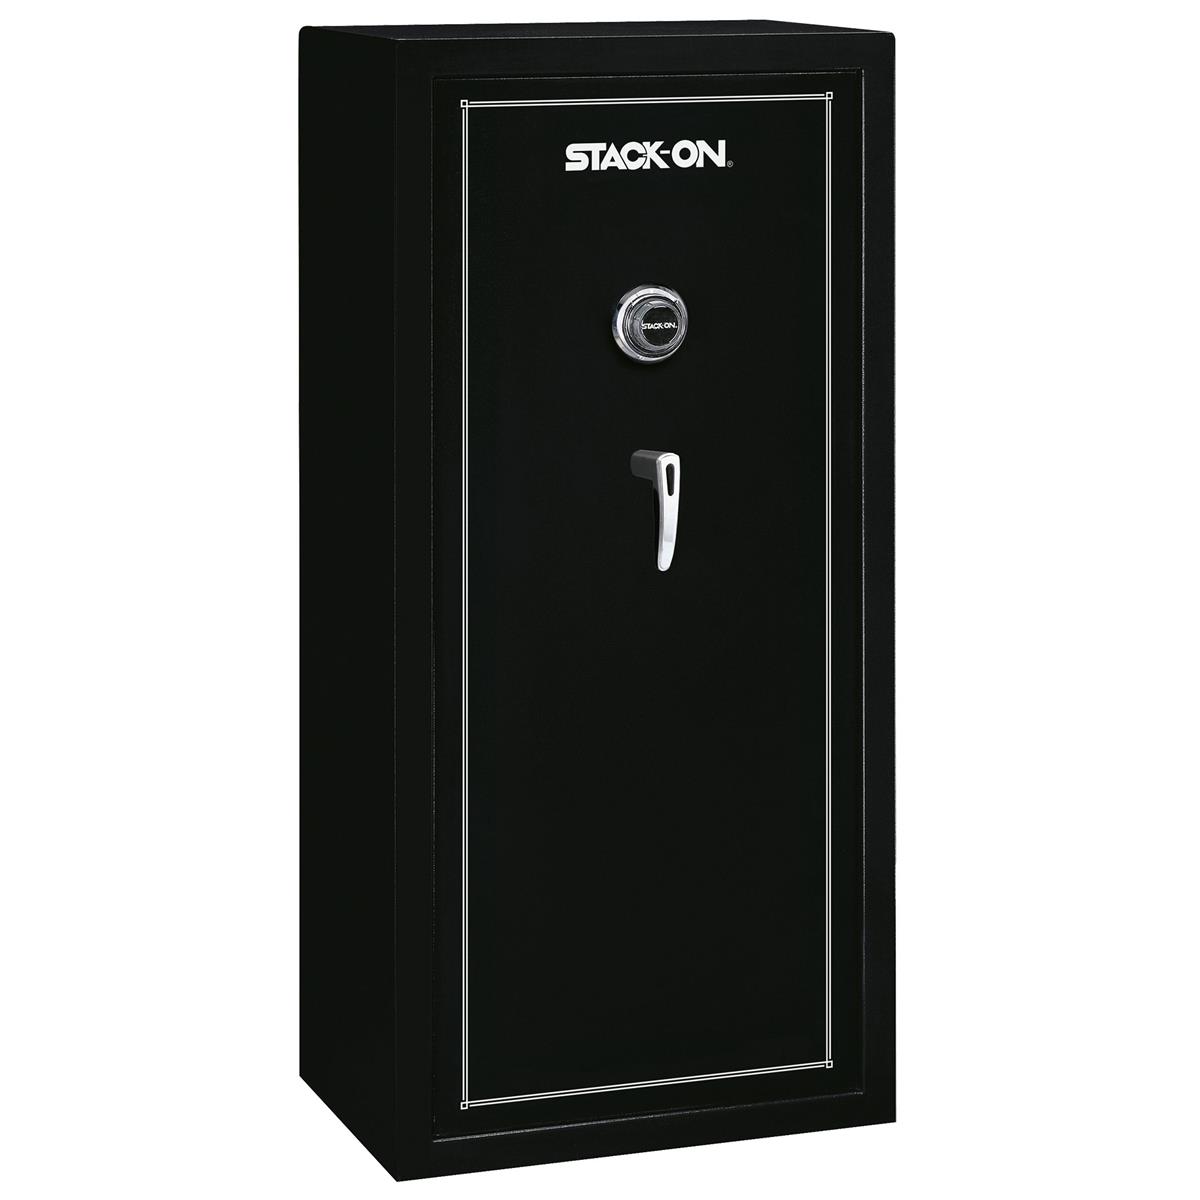 Stack-On 22 Gun Safe with Combination Lock, Matte Black -  SS-22-MB-C